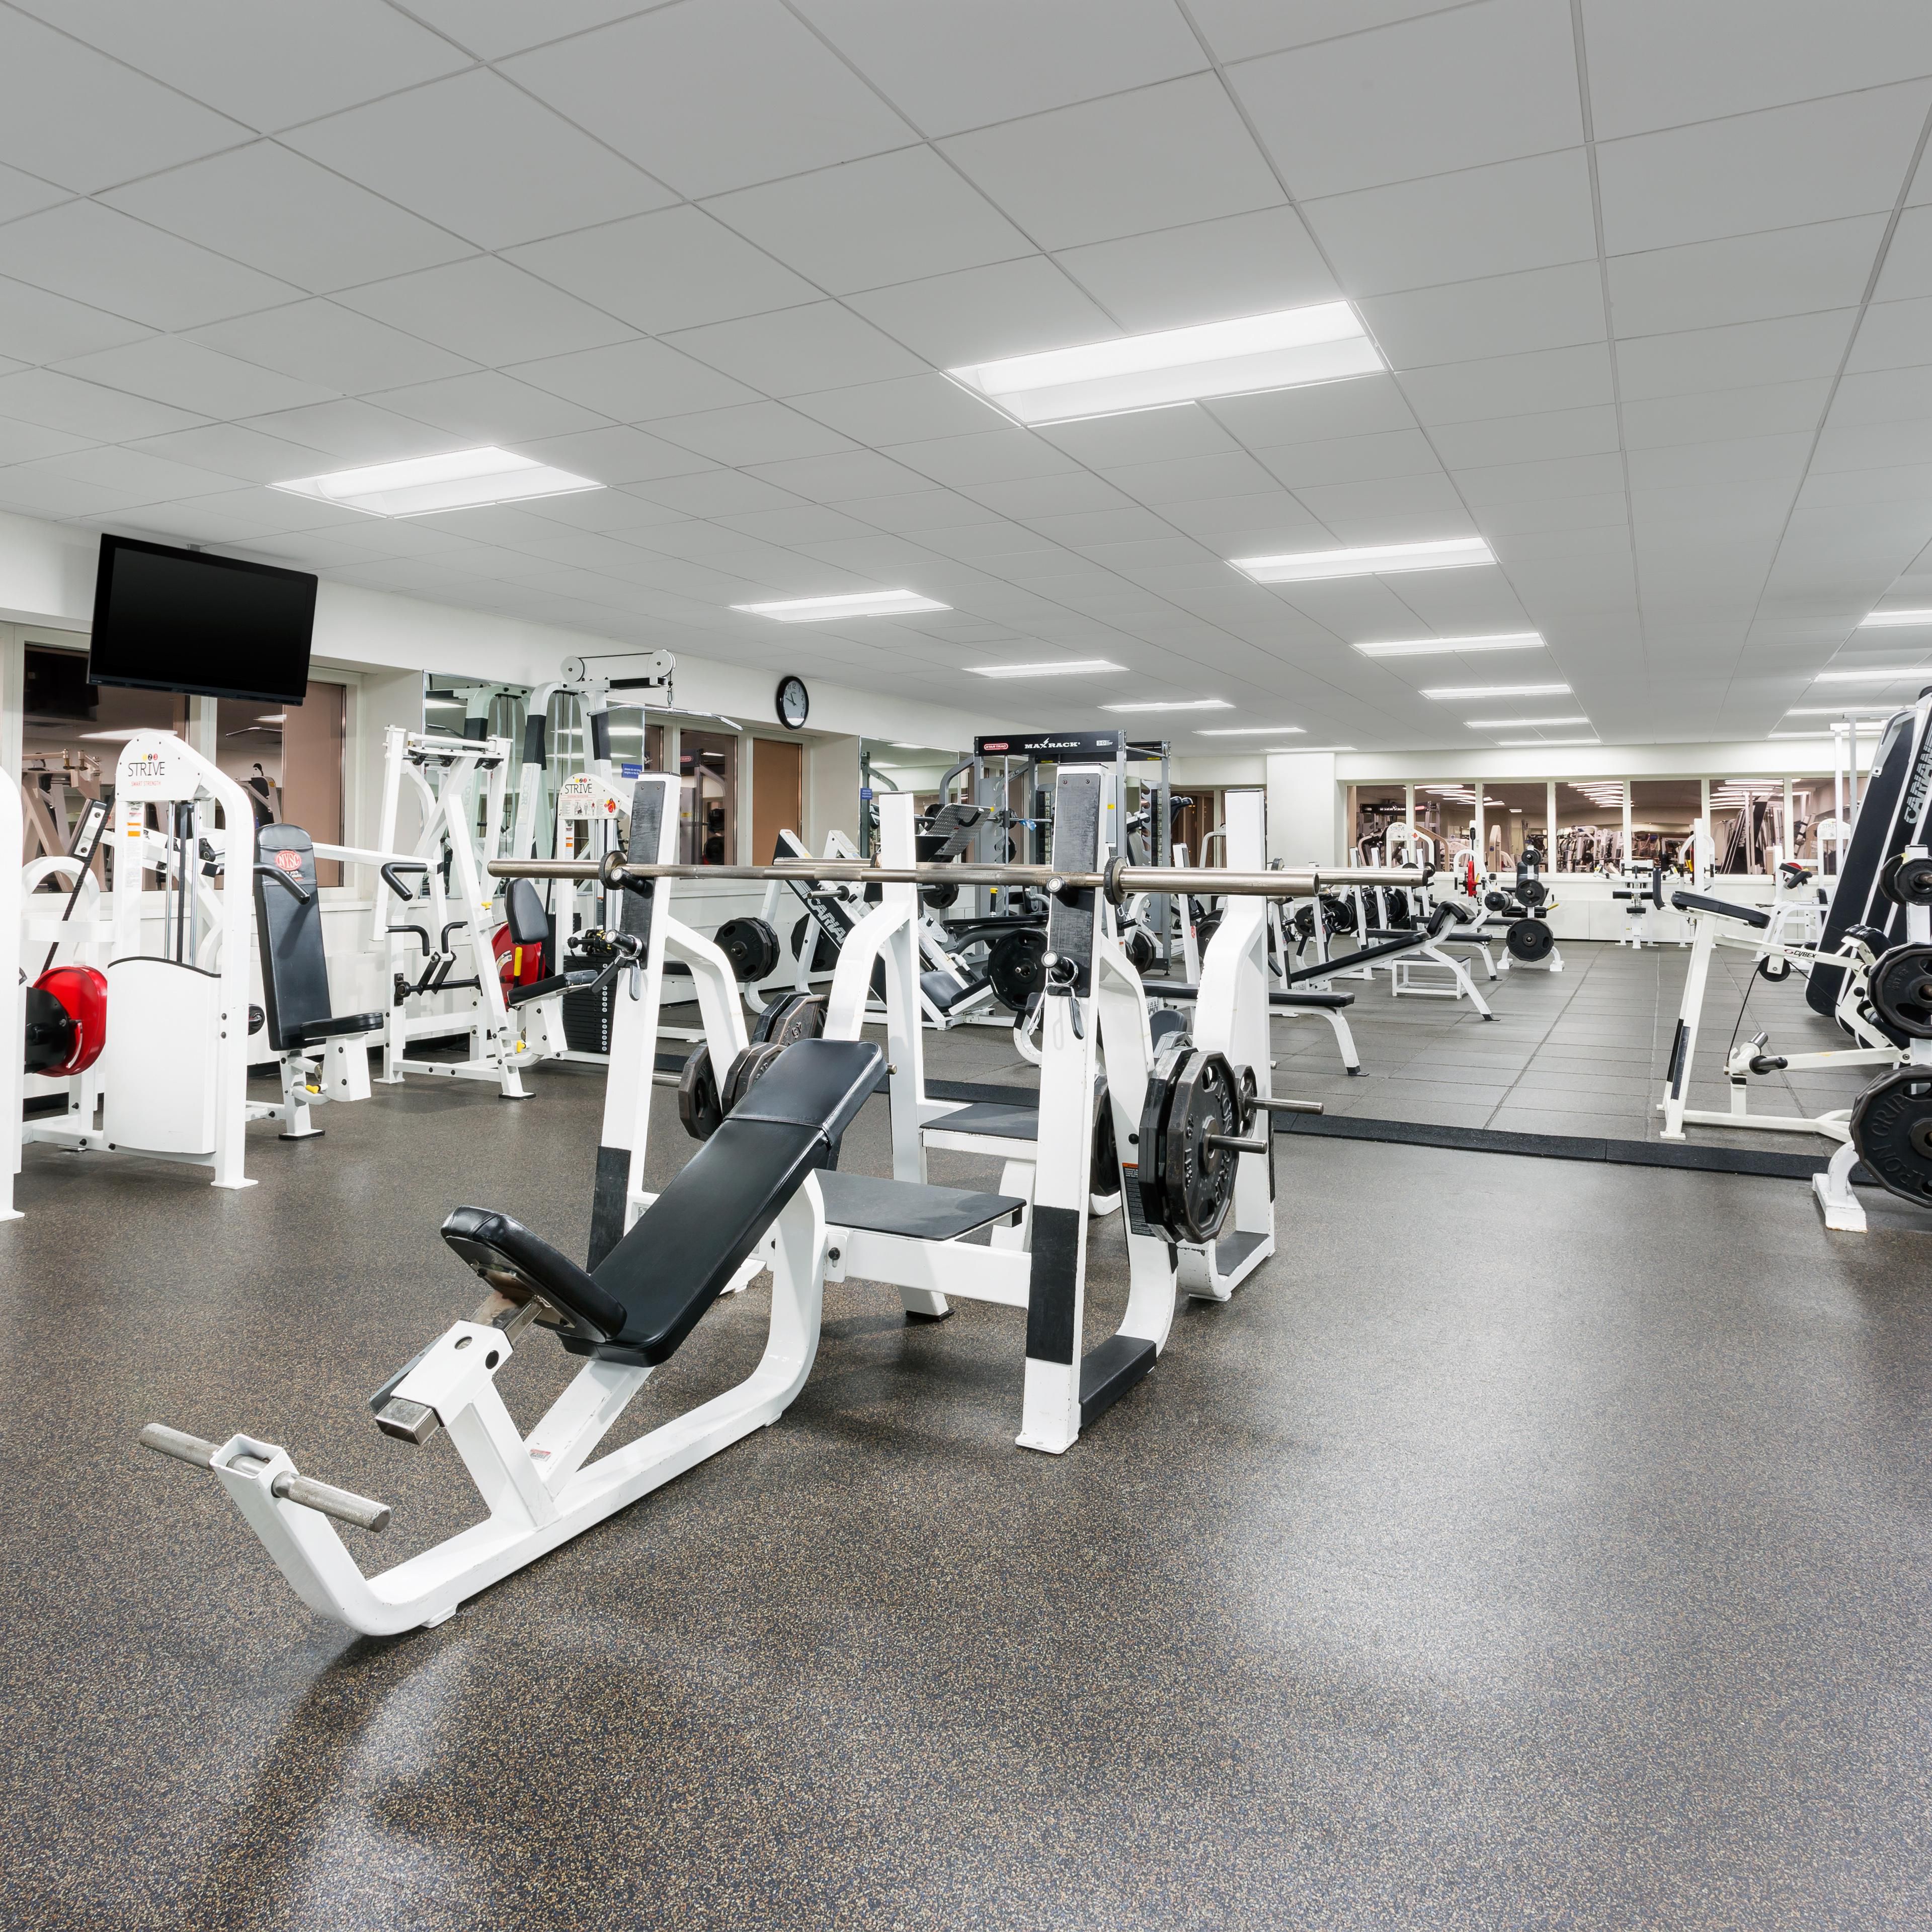 New York Sports Club state of the art fitness center.